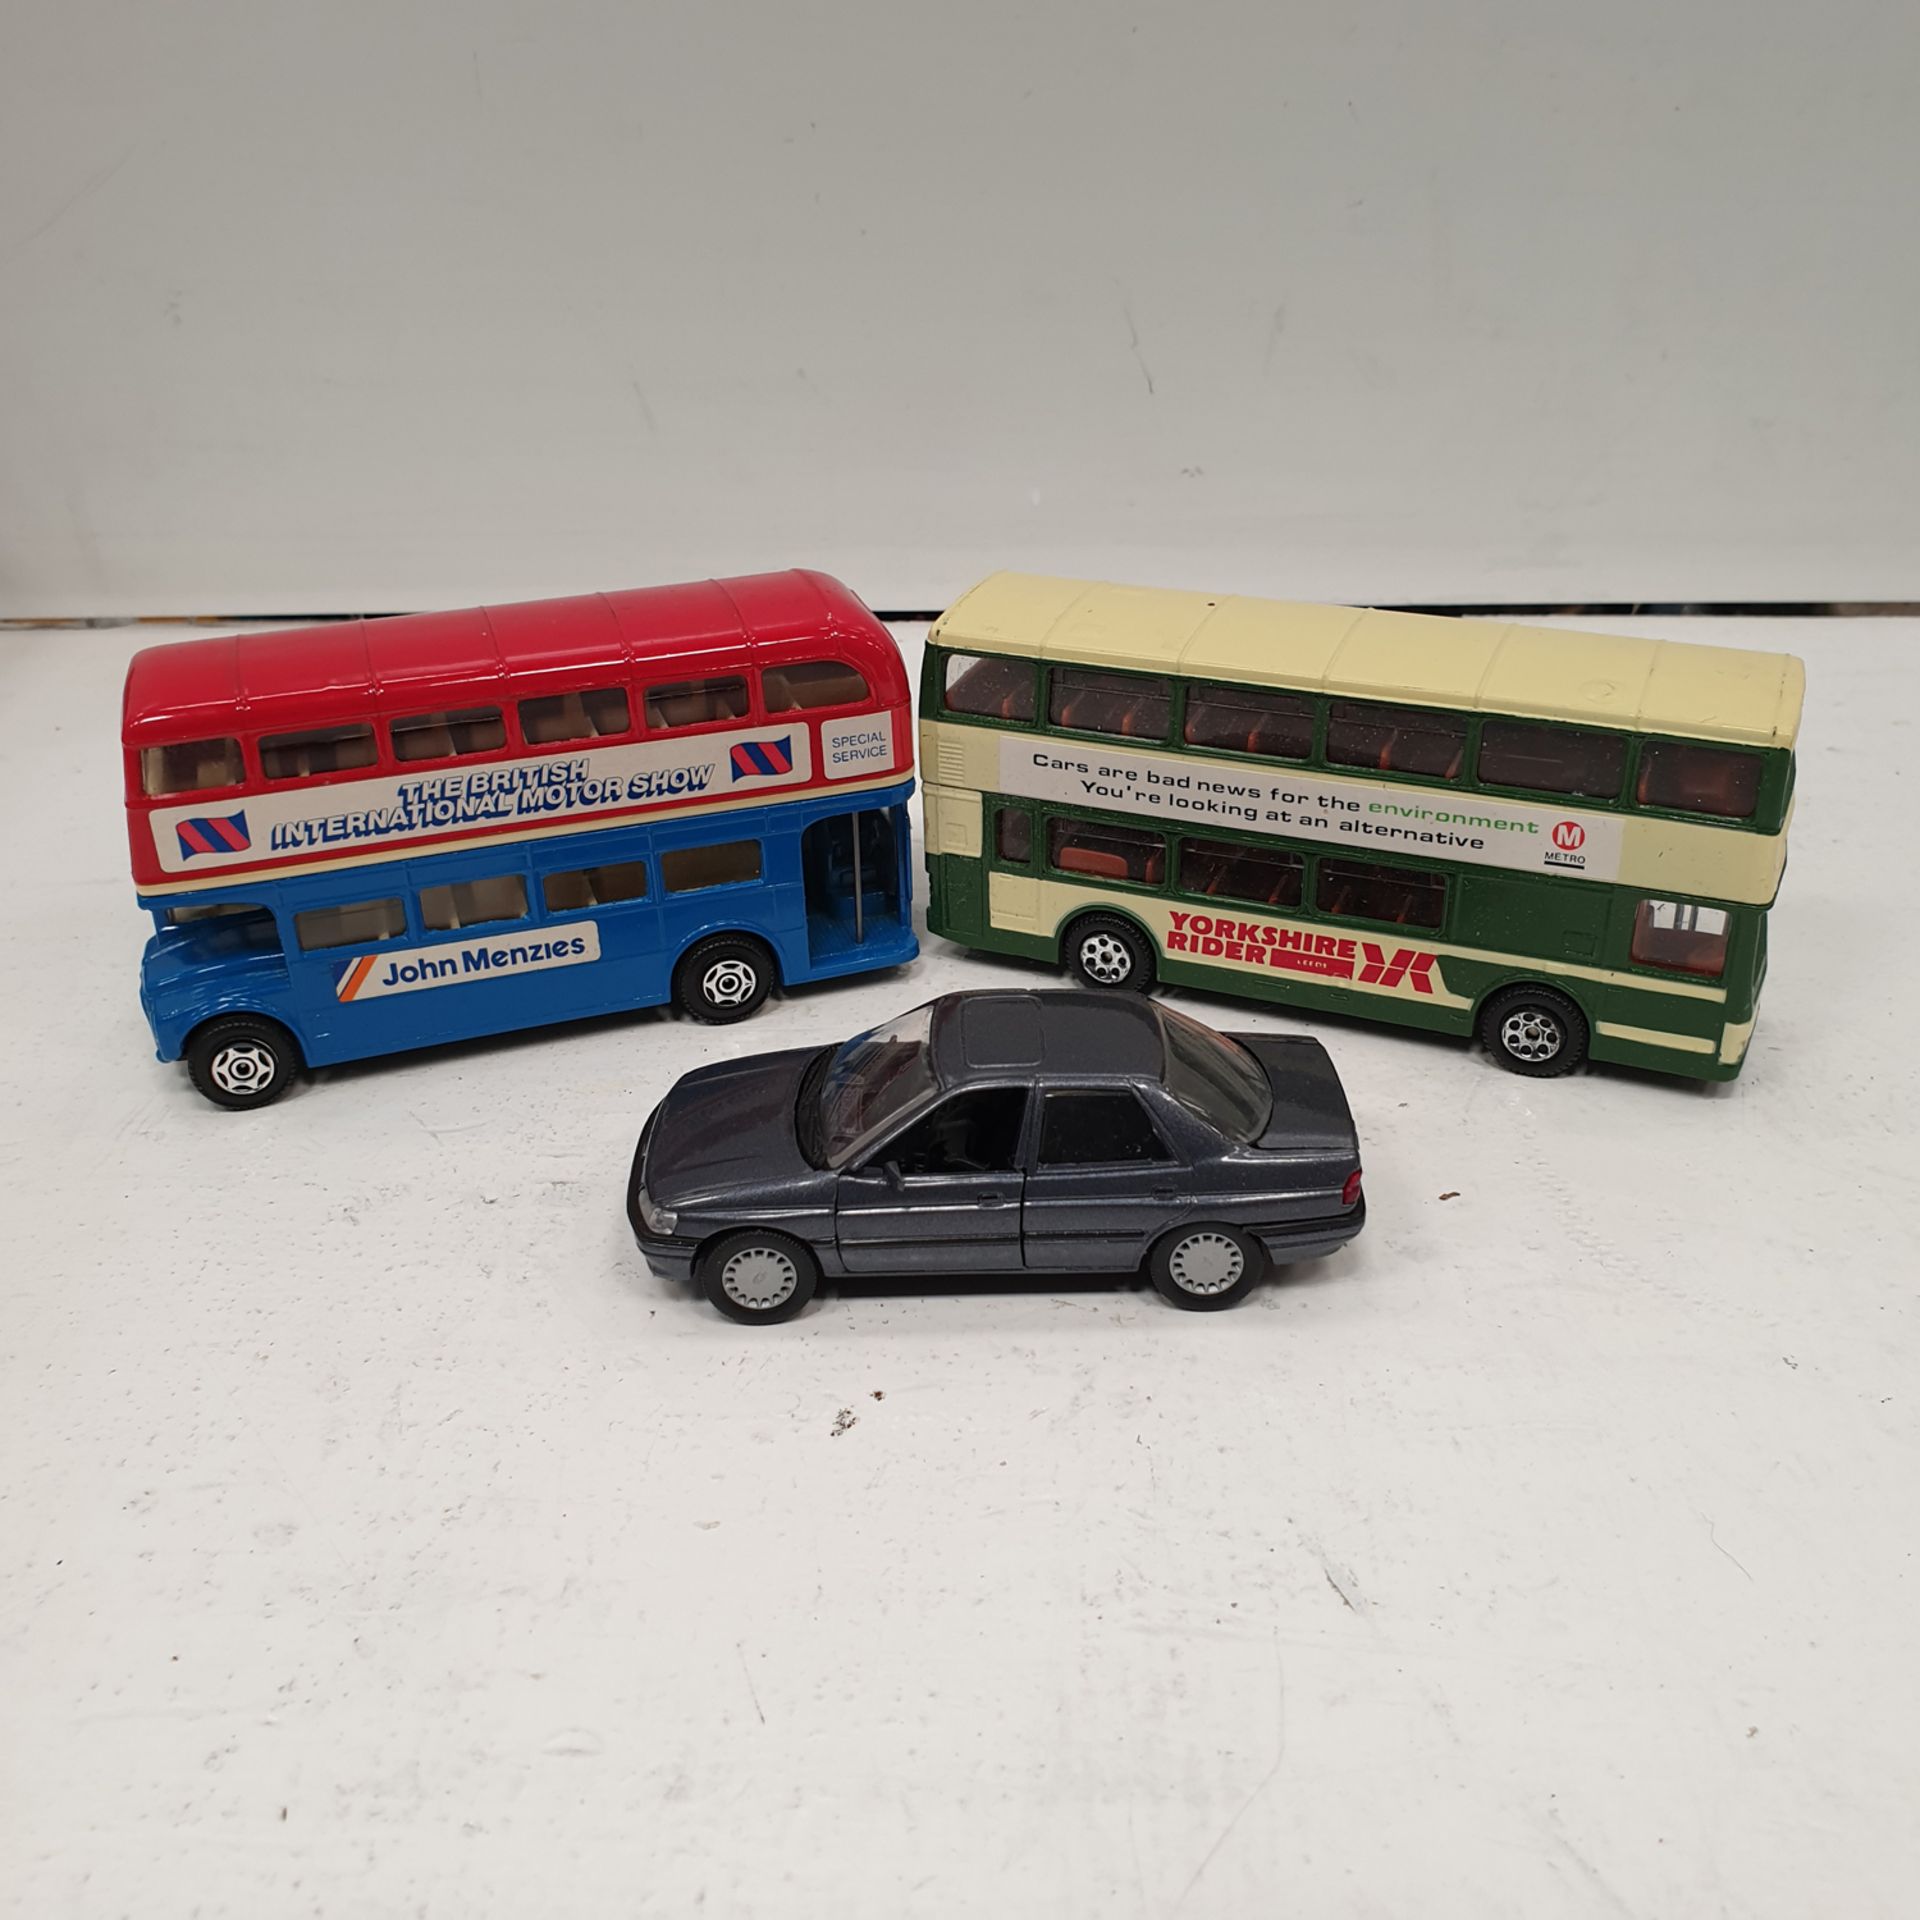 3 x Diecast Models. Includes 2 Busses and 1 Car.